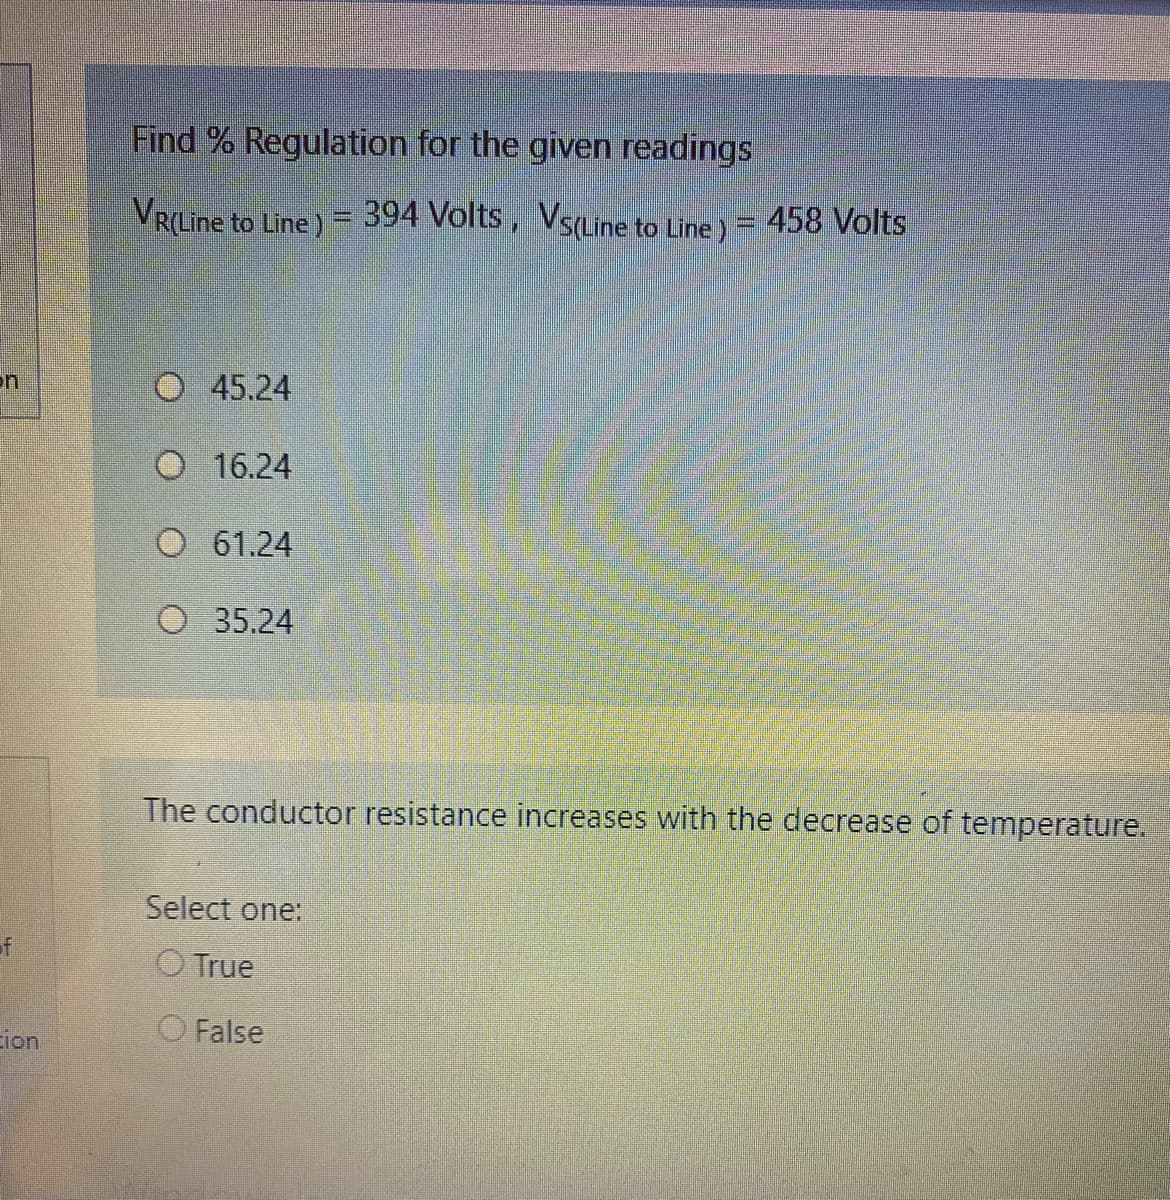 Find % Regulation for the given readings
VR(Line to Line) = 394 Volts, VsLine to Line ) = 458 Volts
on
45.24
16.24
O 61.24
O 35.24
The conductor resistance increases with the decrease of temperature.
Select one:
of
O True
Eion
O False
